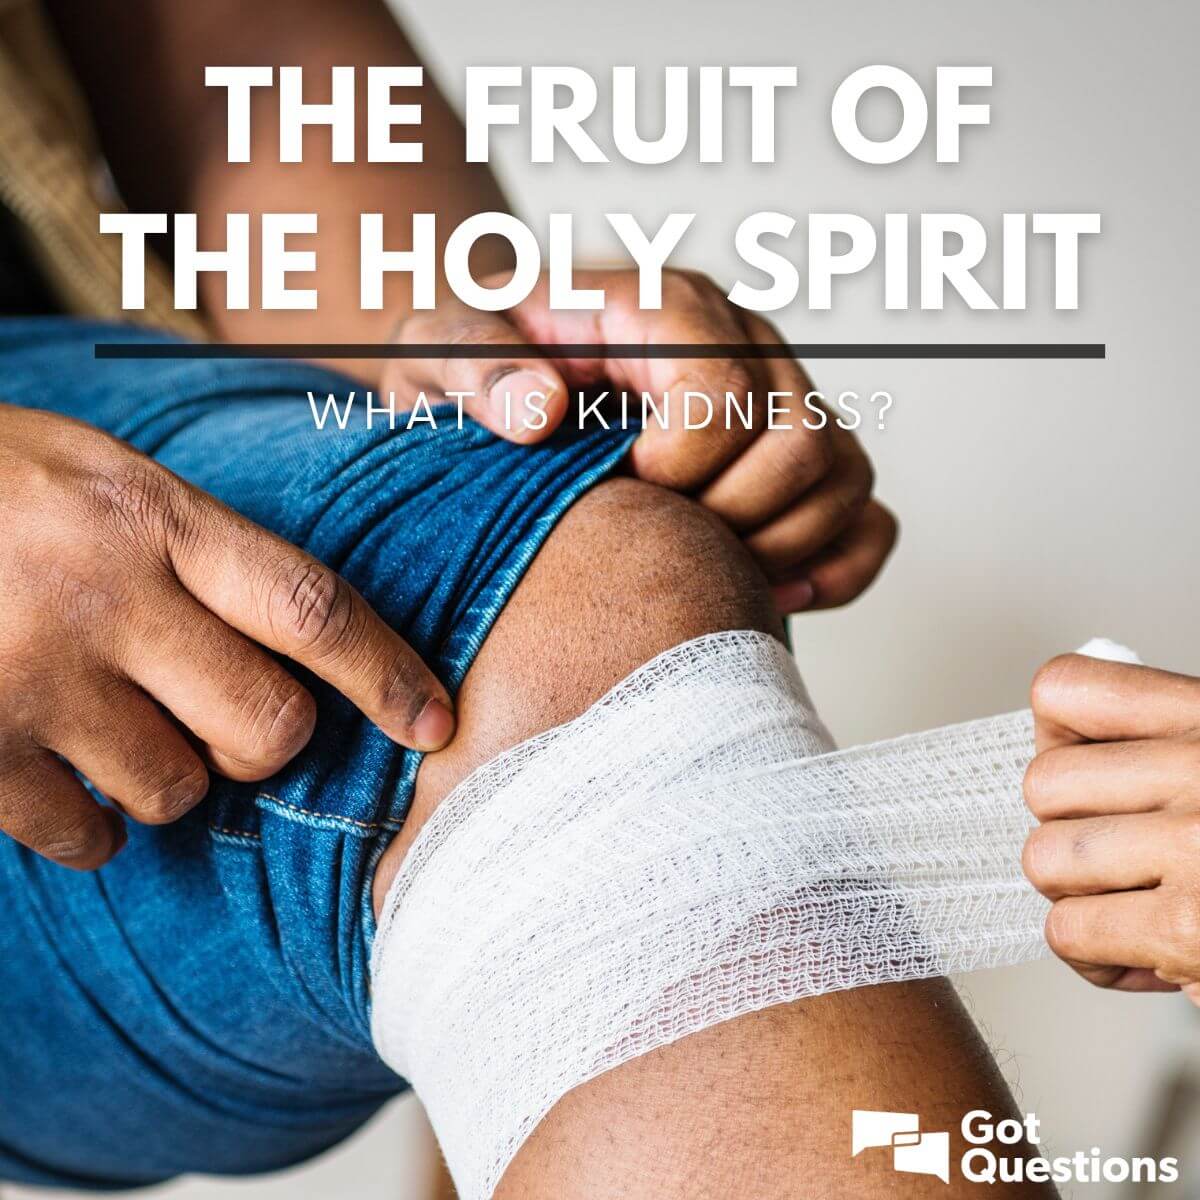 The Fruit of the Holy Spirit – What is kindness? | GotQuestions.org